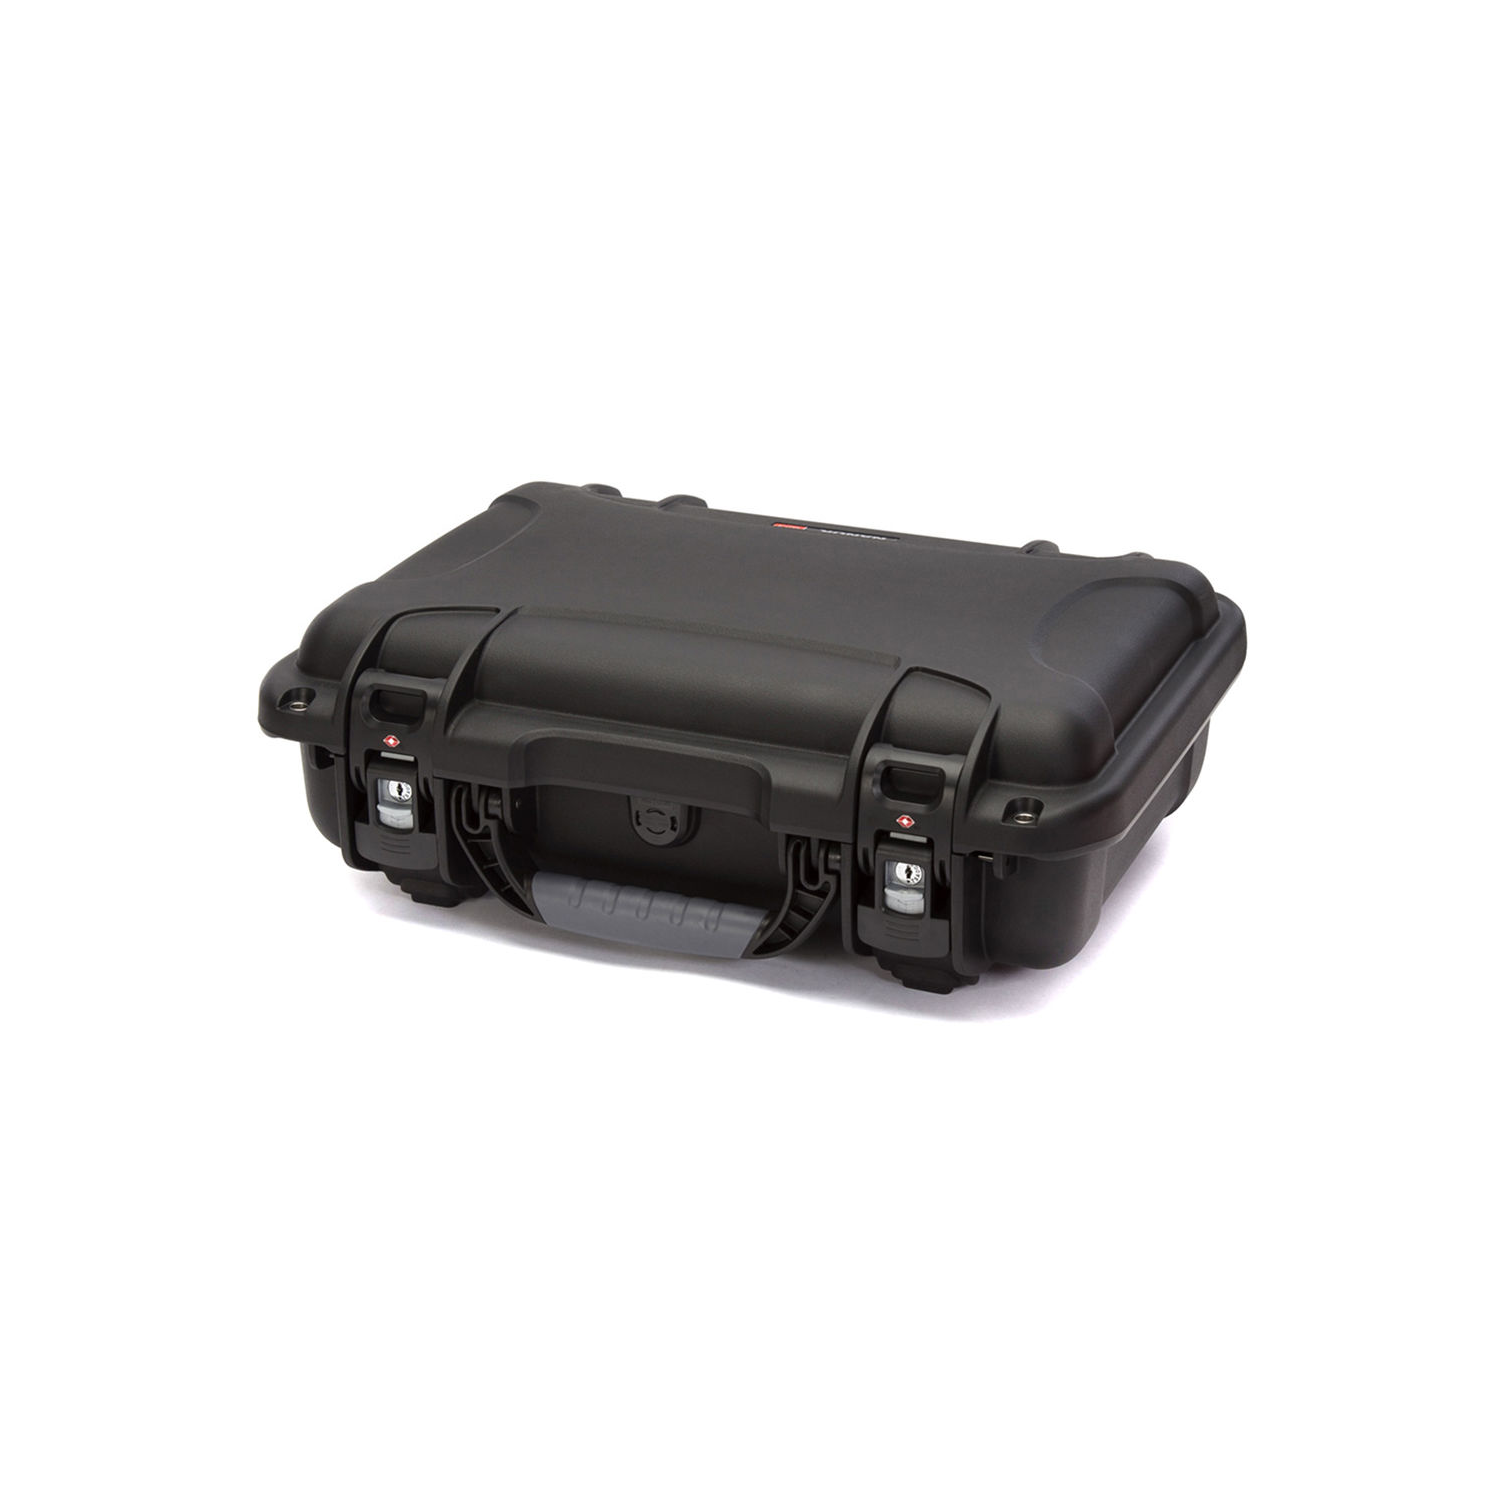 Nanuk 923 Protective Case with Cubed Foam